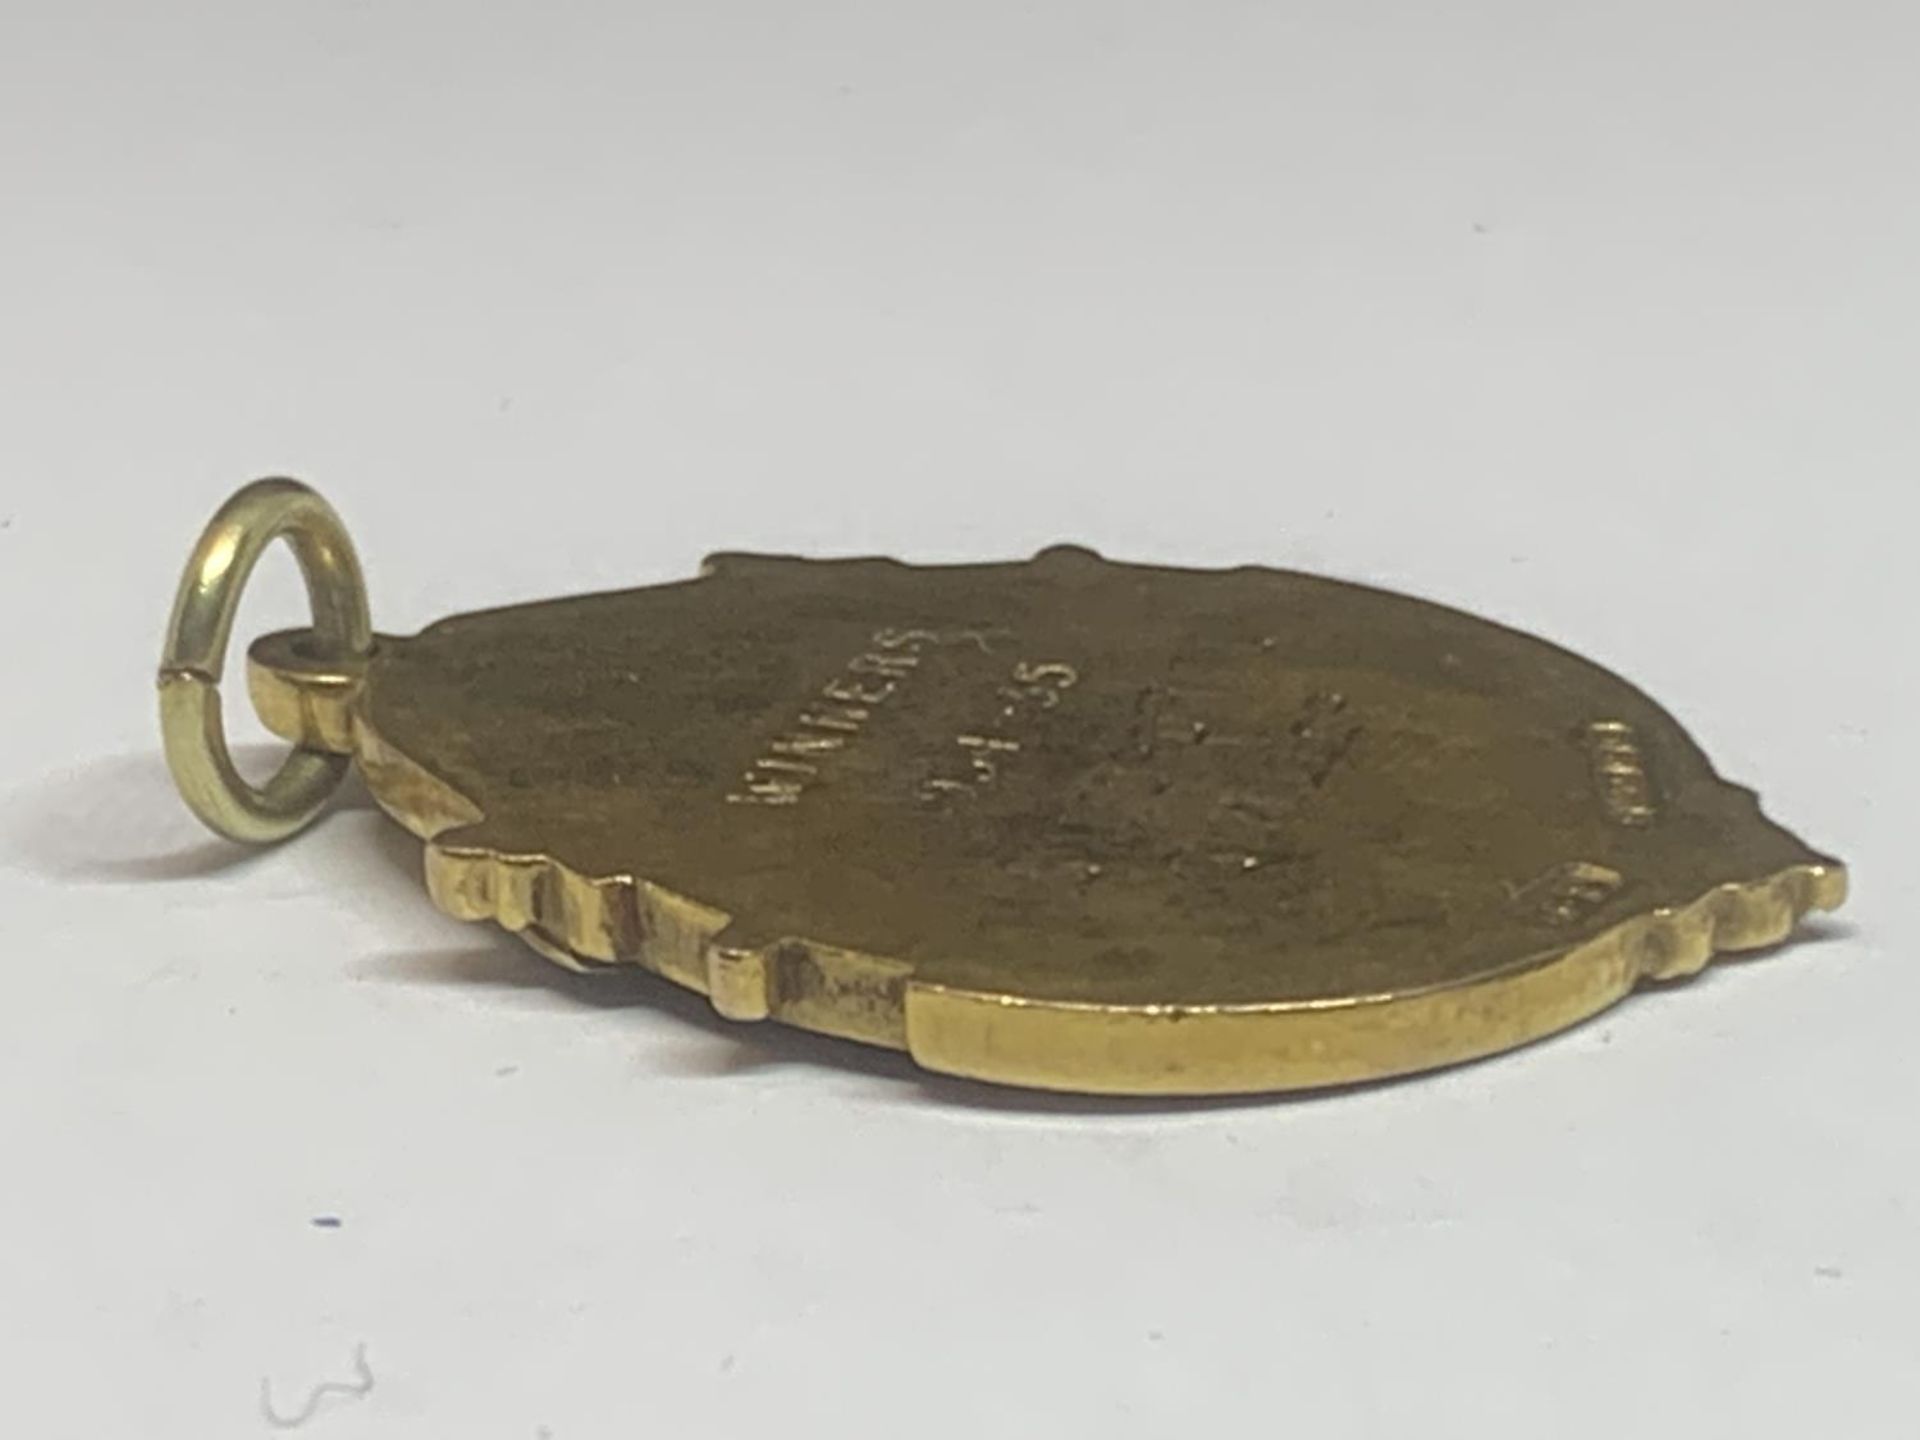 A HALLMARKED 9 CARAT GOLD LANCASHIRE RUGBY LEAGUE MEDAL ENGRAVED WINNERS 1934-35 SALFORD R.F.C S. - Image 6 of 6